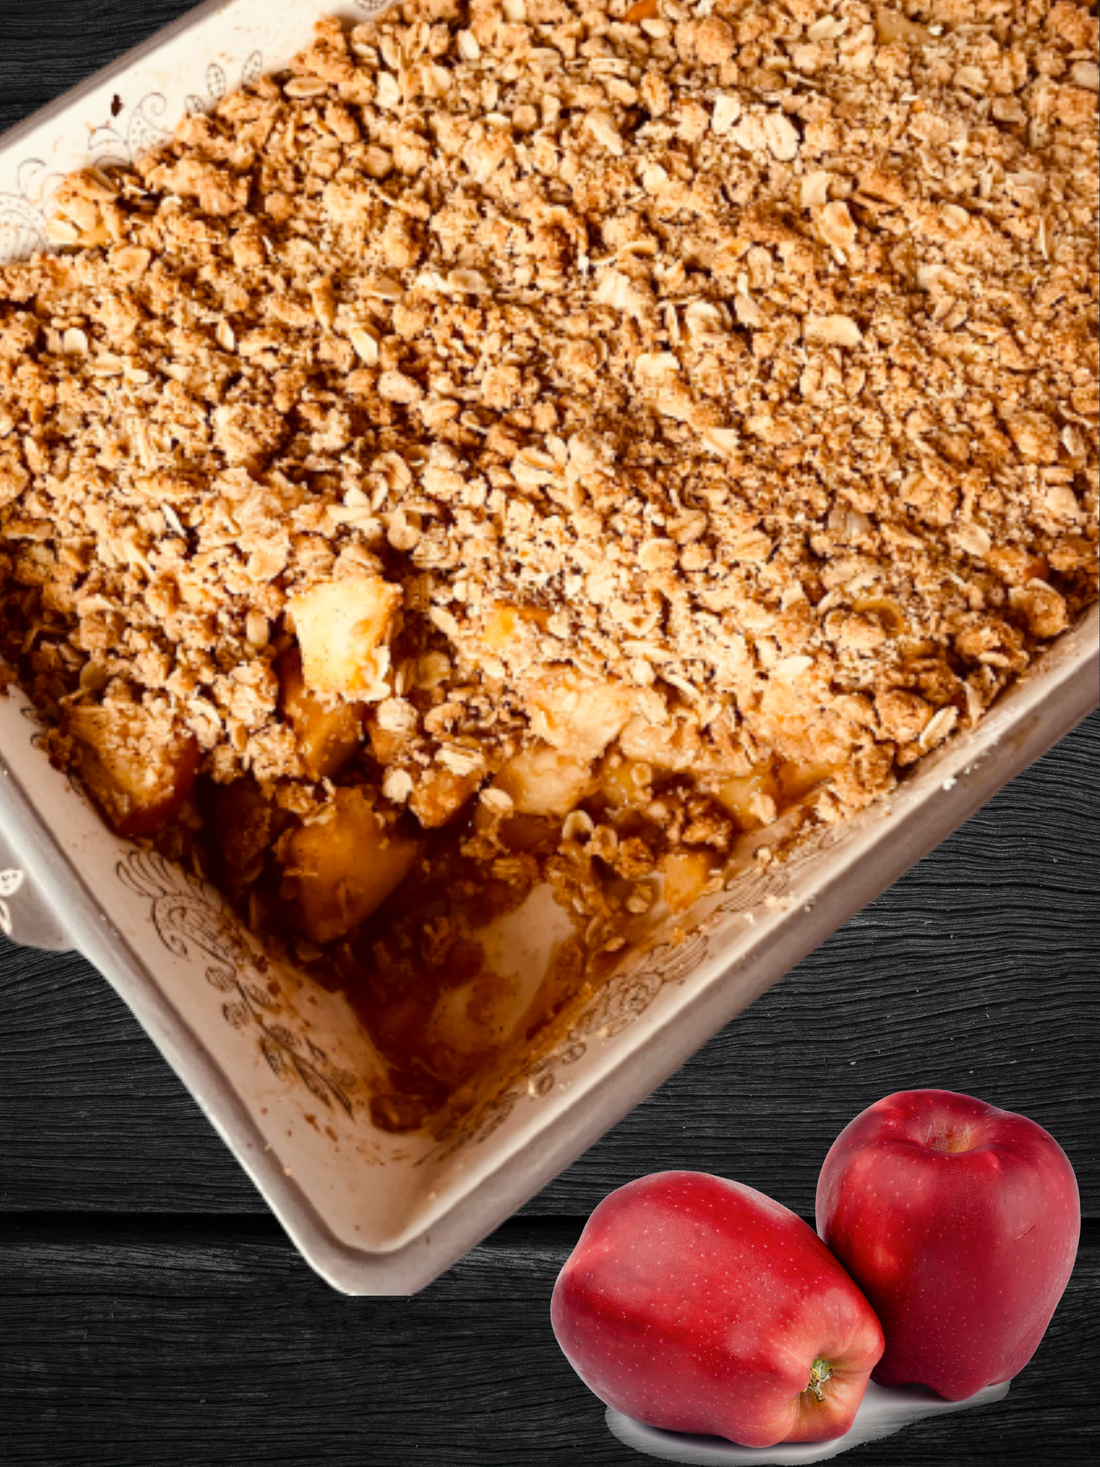 Easy Healthy Oats and Apple Cobbler